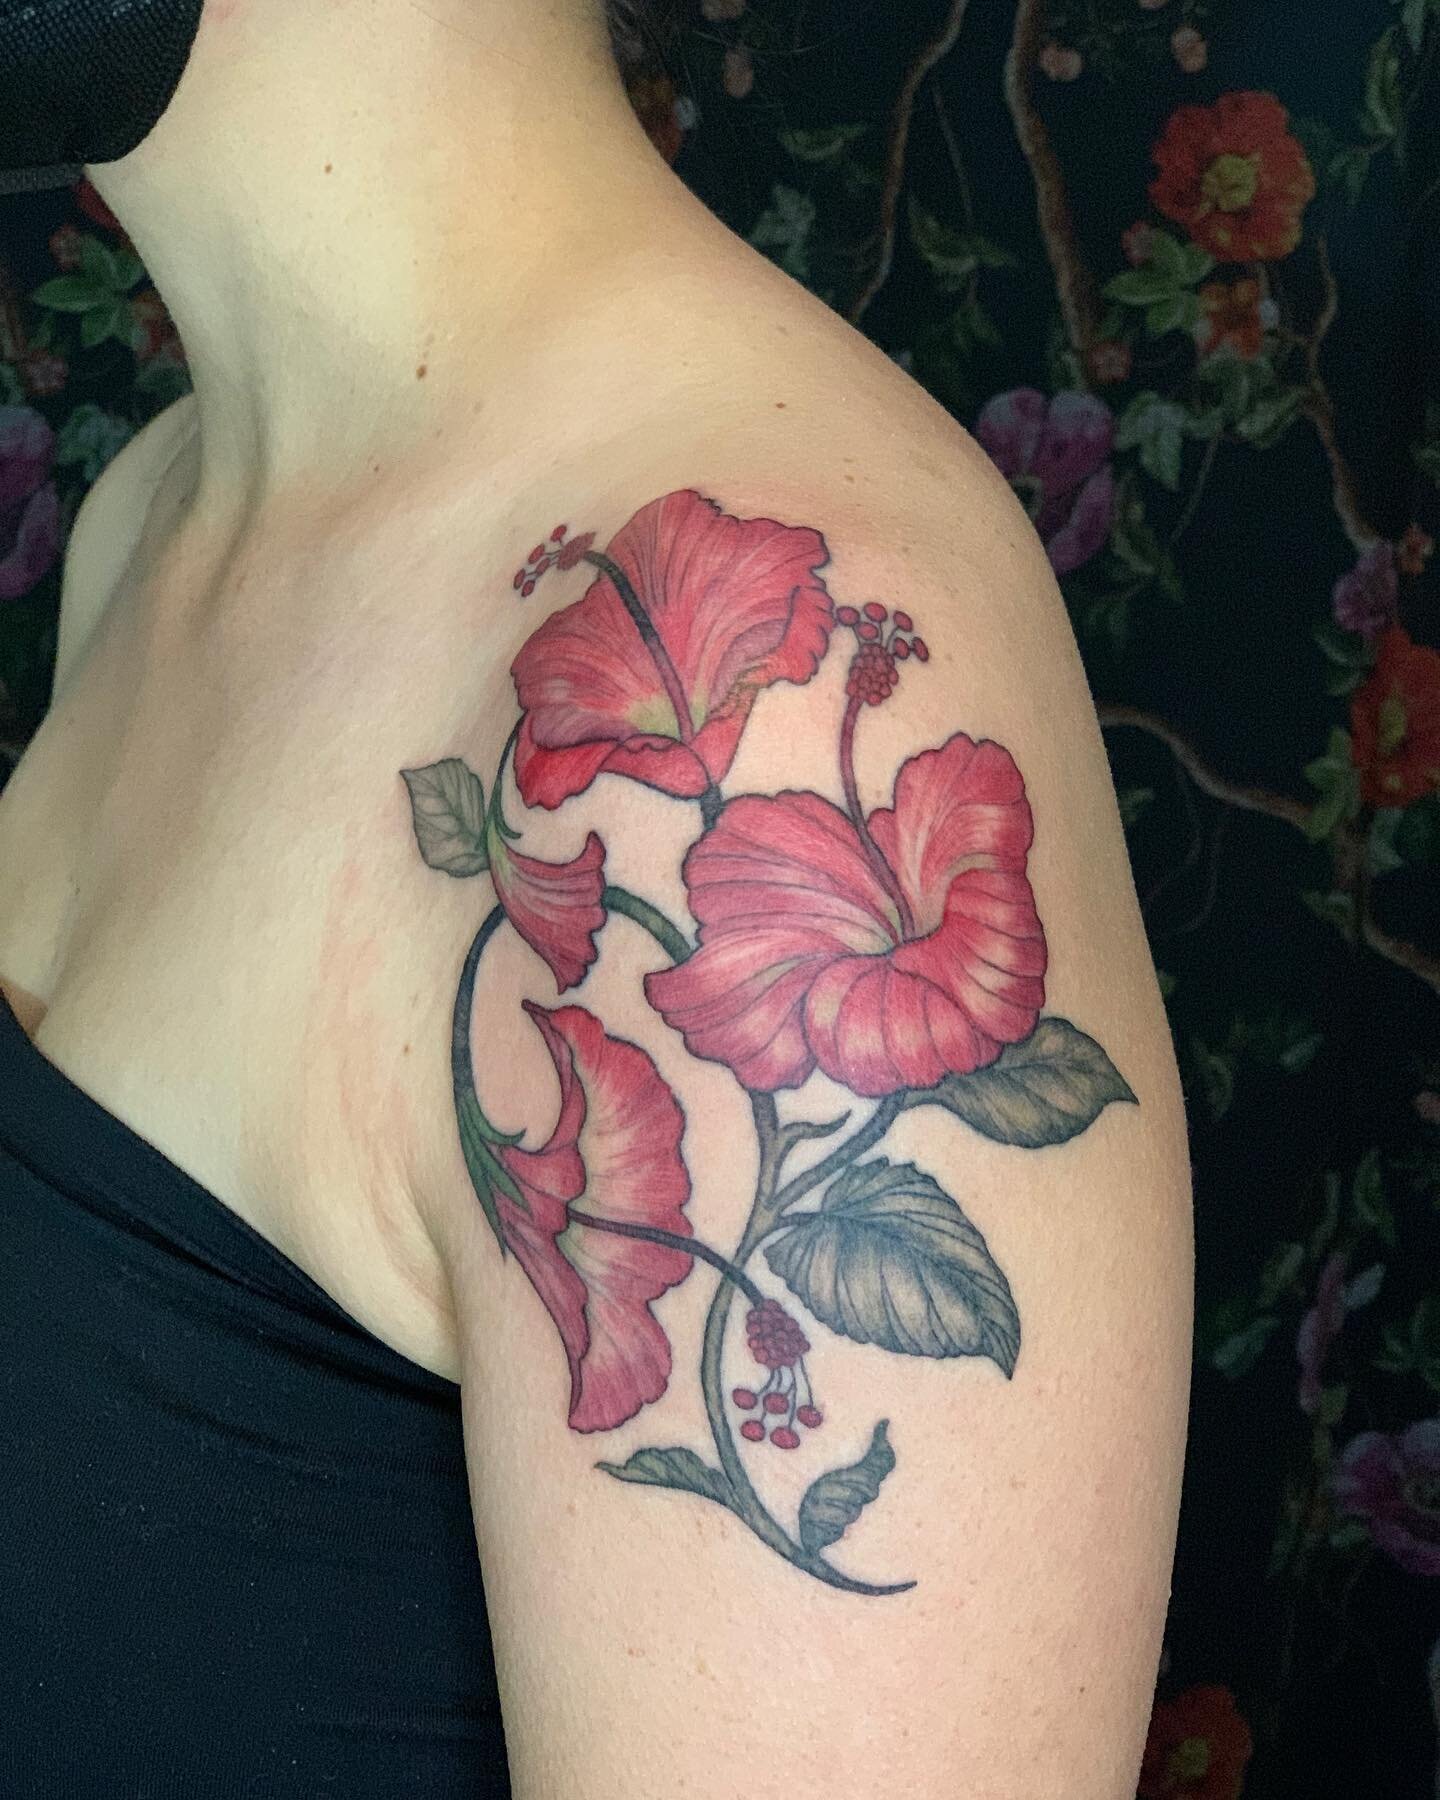 Art nouveau hibiscuses 🌺 I&rsquo;m beyond happy to have been able to tattoo this. Thank you Courtney!
.
.
.
#artnouveautattoo #artnouveau #hibiscustattoo #botanicaltattoo #floraltattoo